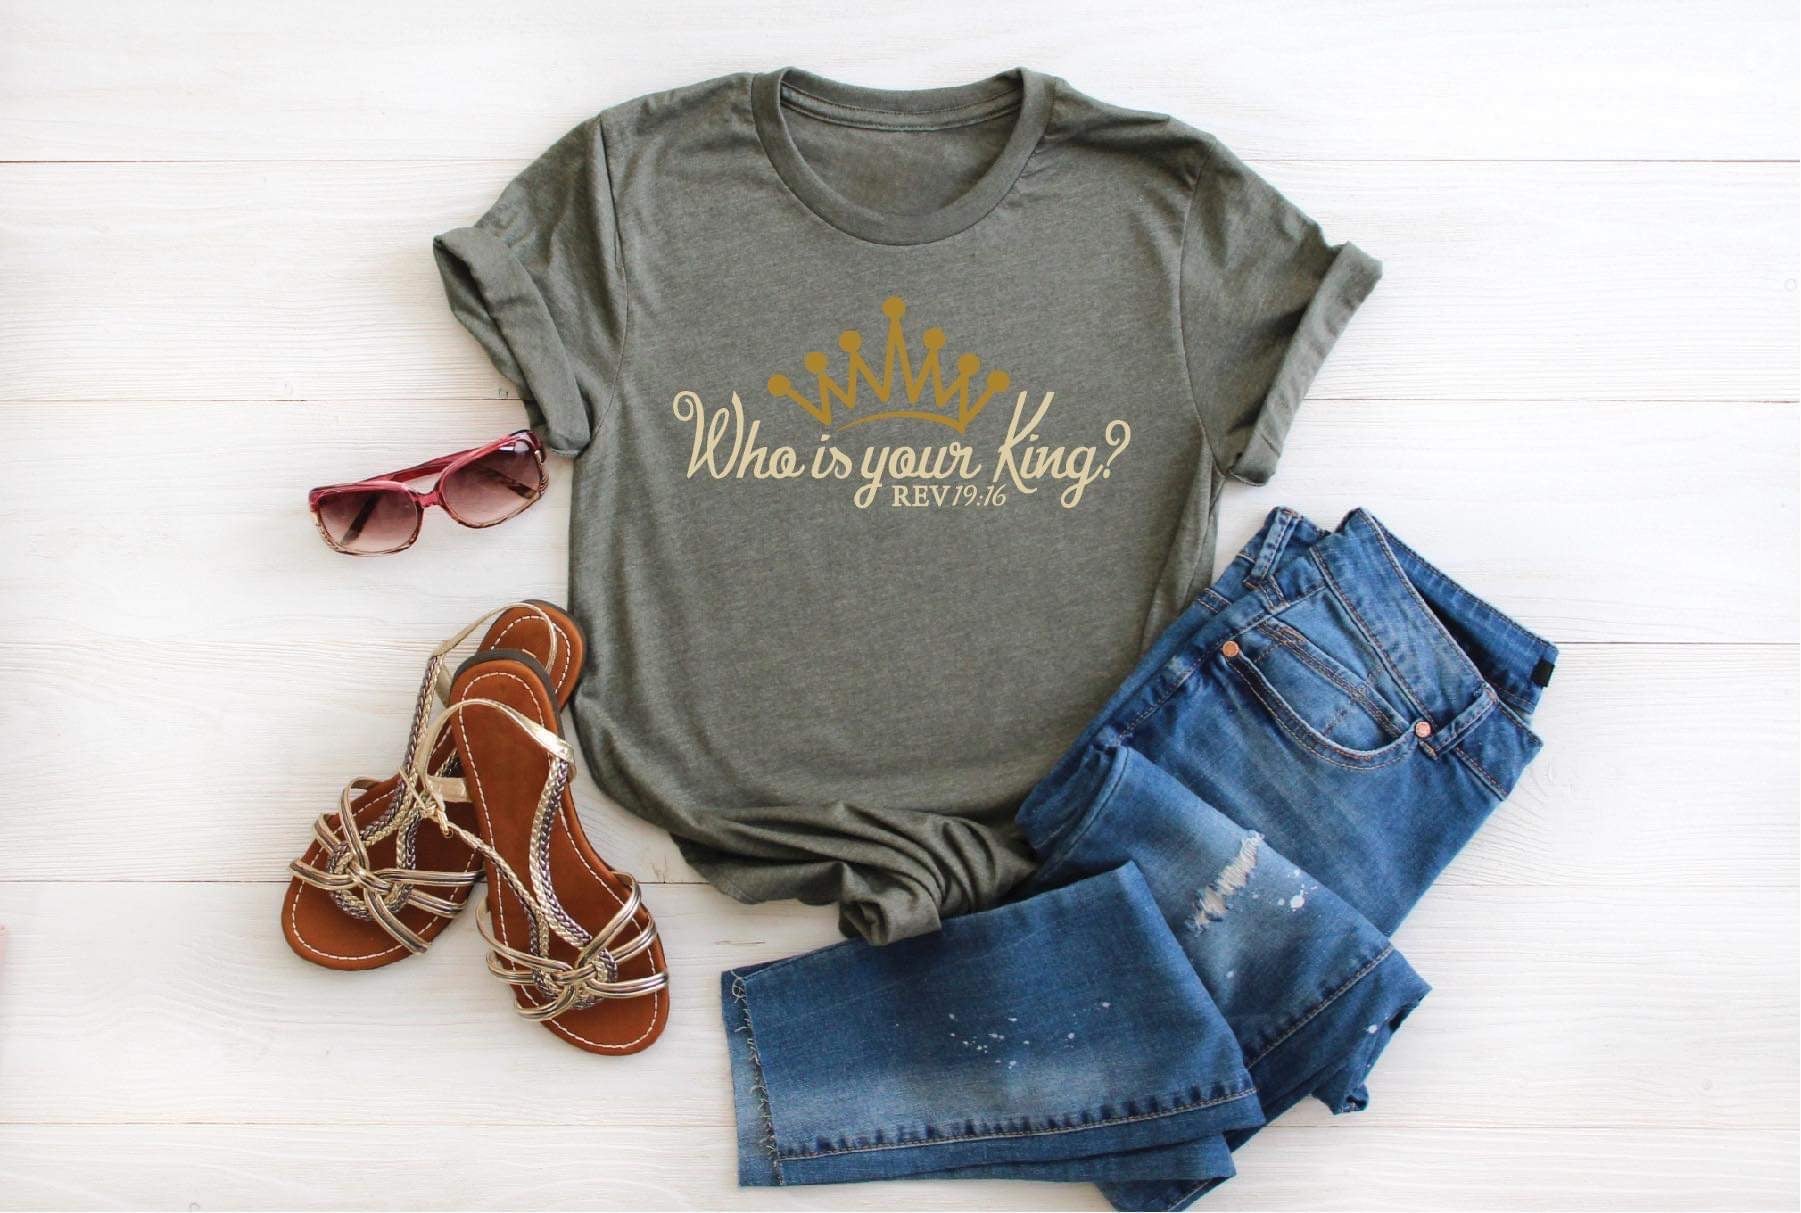 "Who is Your King?" Tee